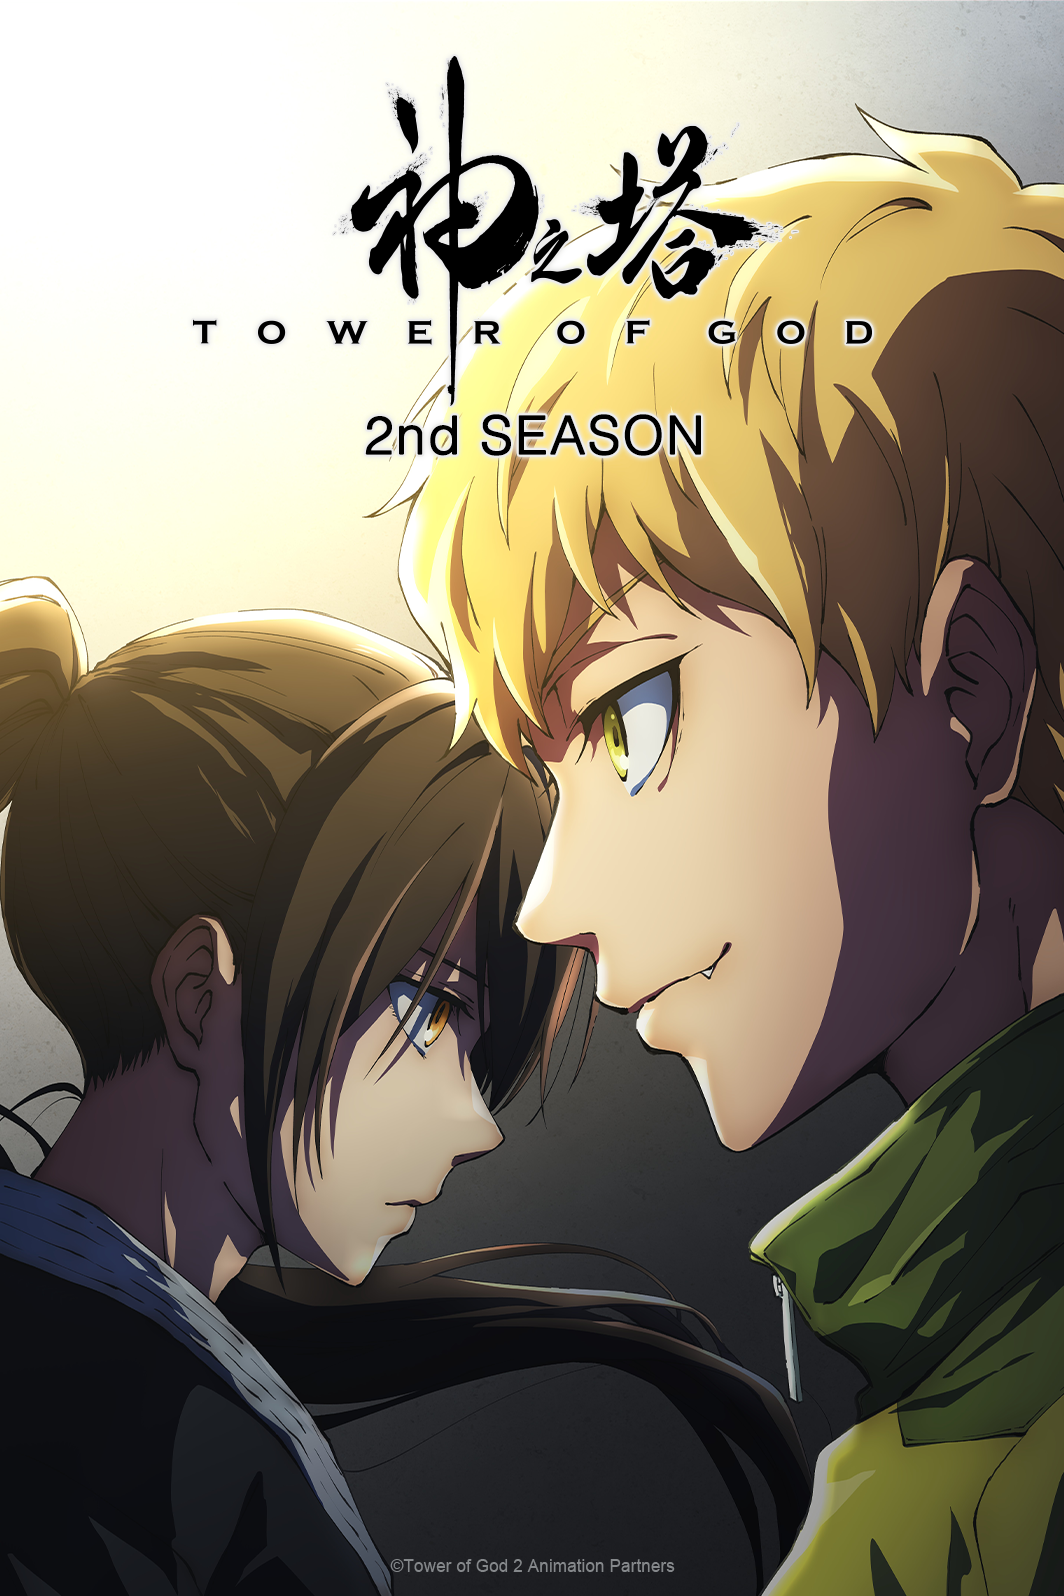 Tower of God Receives Second Anime Season